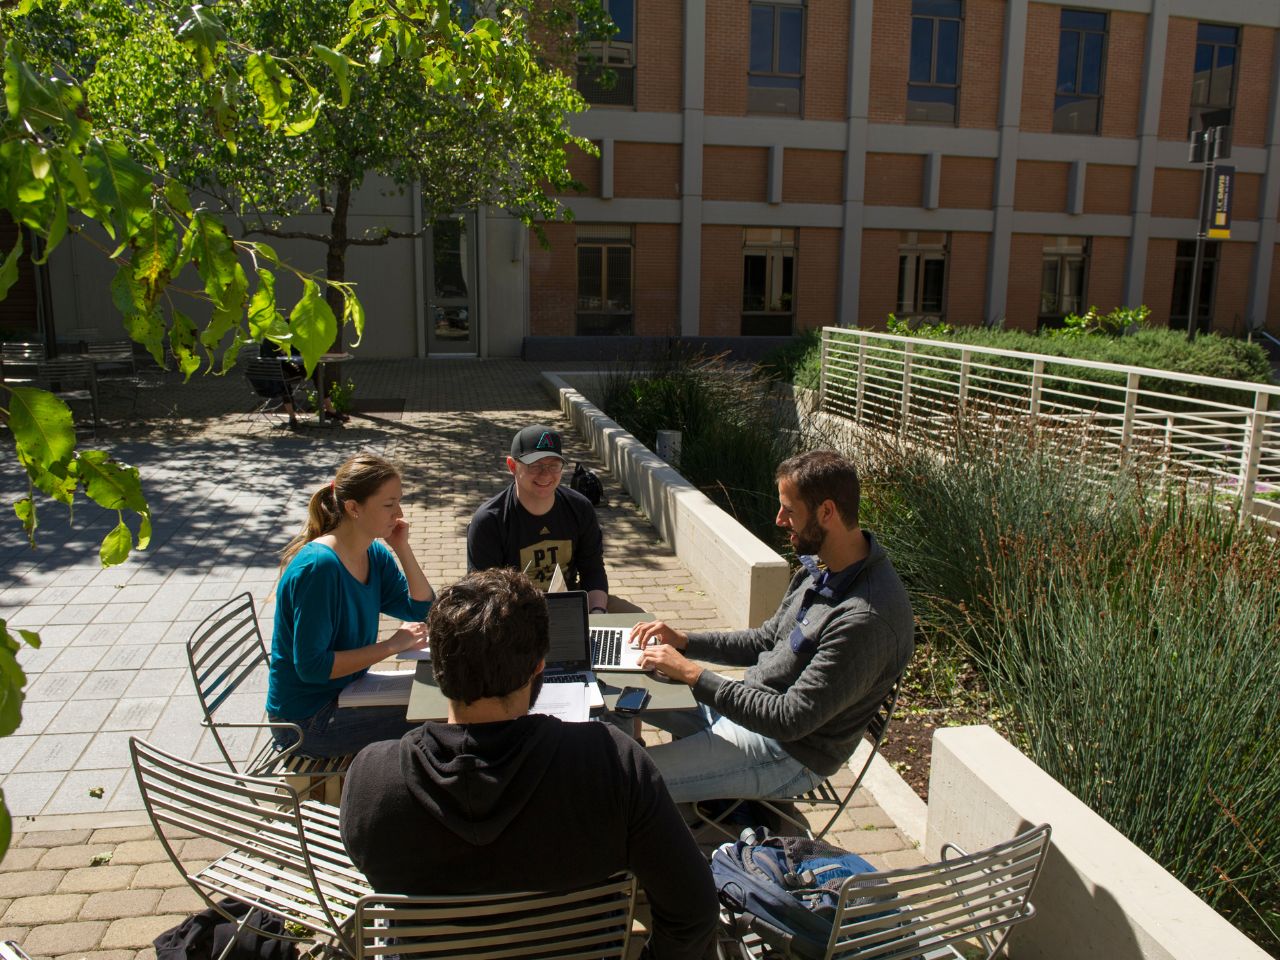 A group of students sit around a table in the courtyard of King Hall, talking and working on laptops.